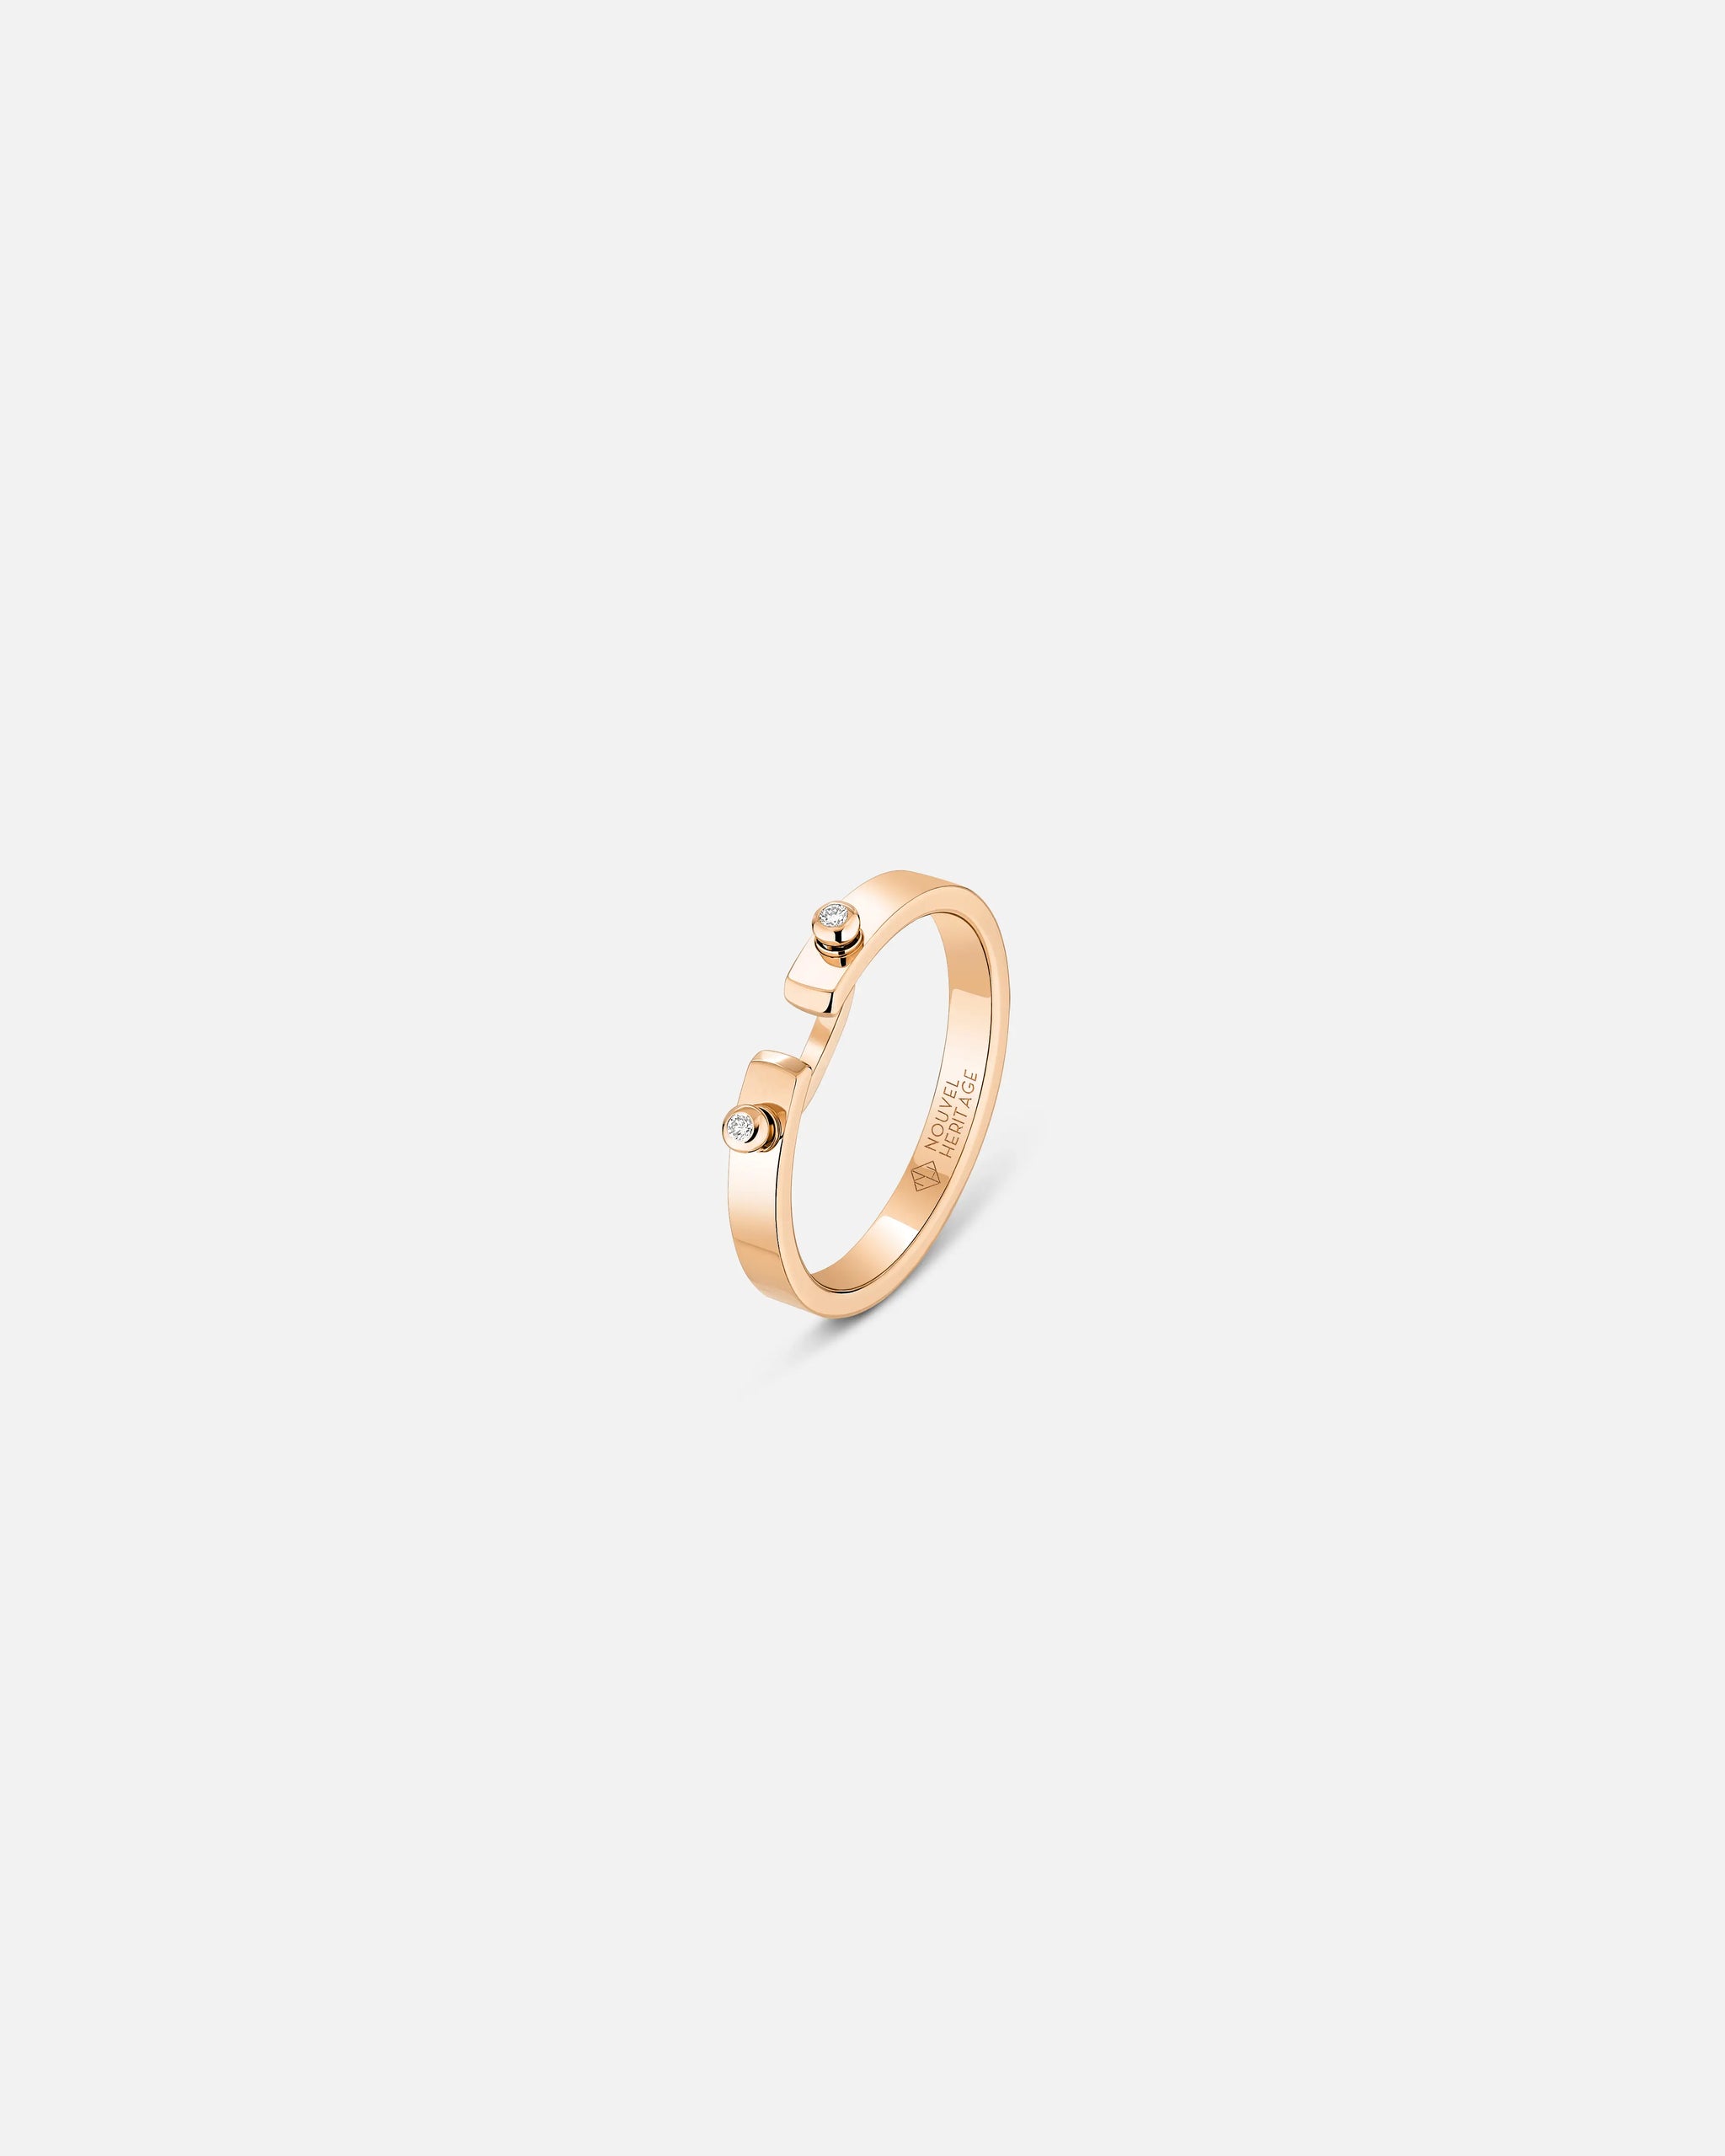 Monday Morning PM Mood Ring in Rose Gold - 1 - Nouvel Heritage